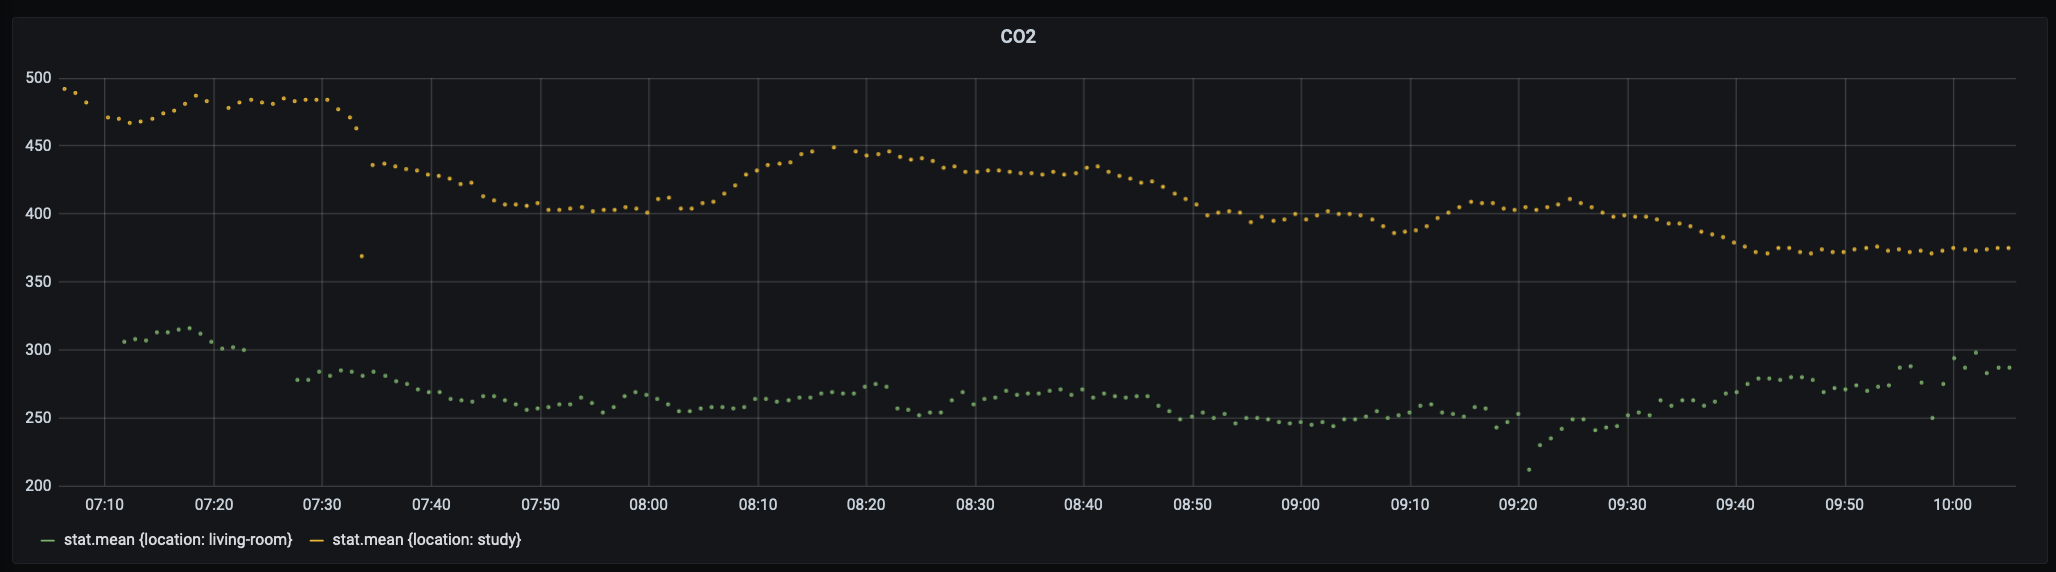 graph of CO₂ data